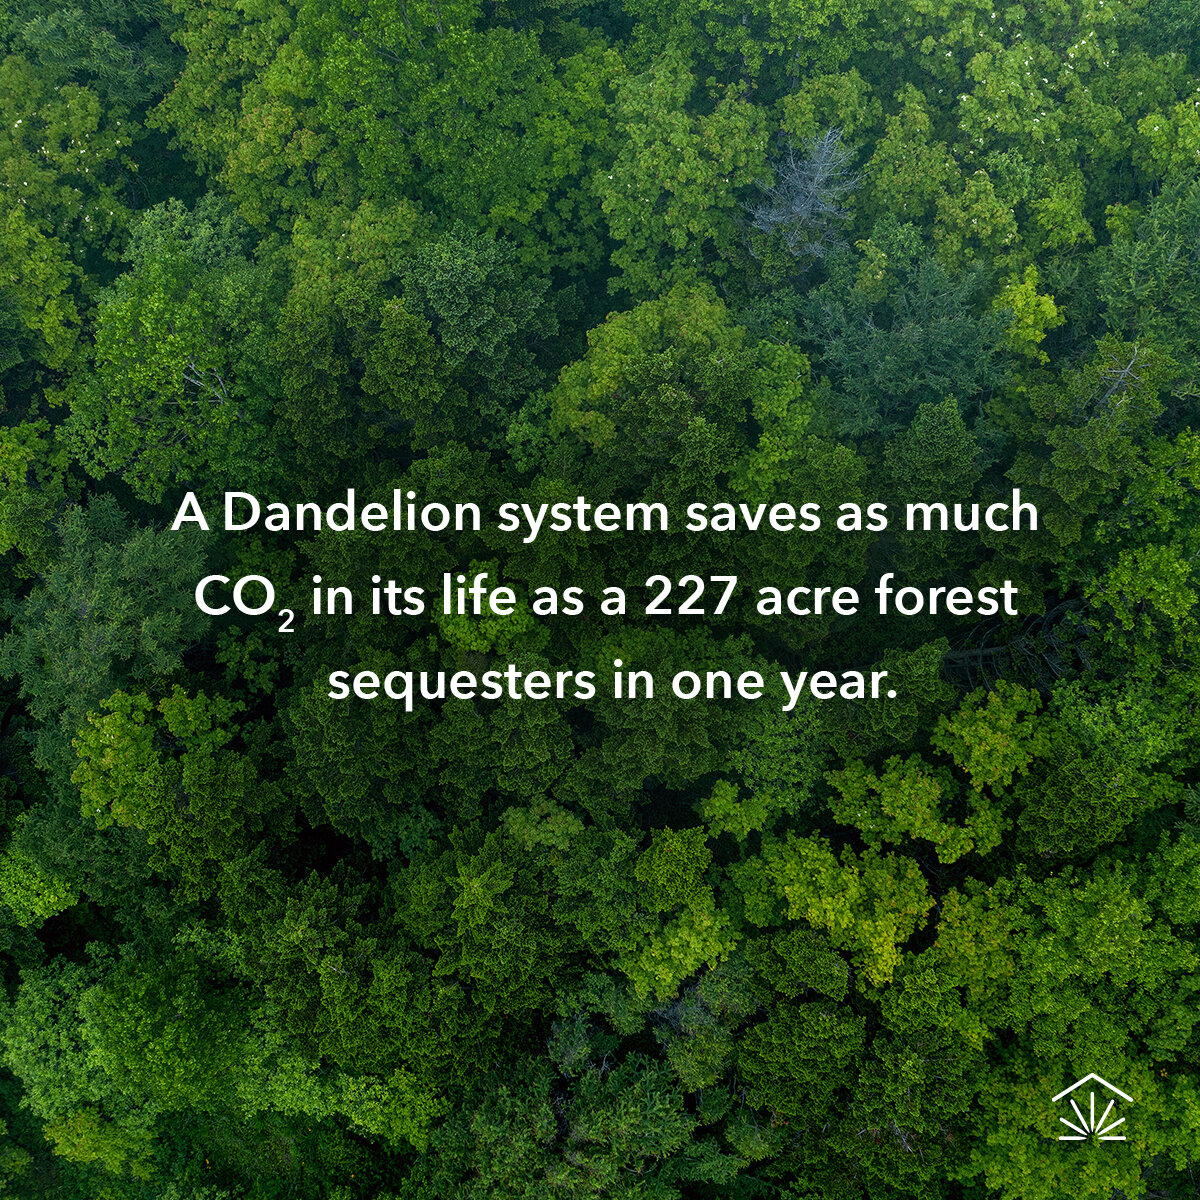 A photograph of a forest with the text 'A Dandelion system saves as much CO2 in its life as a 227 acre forest sequesters in one year.'